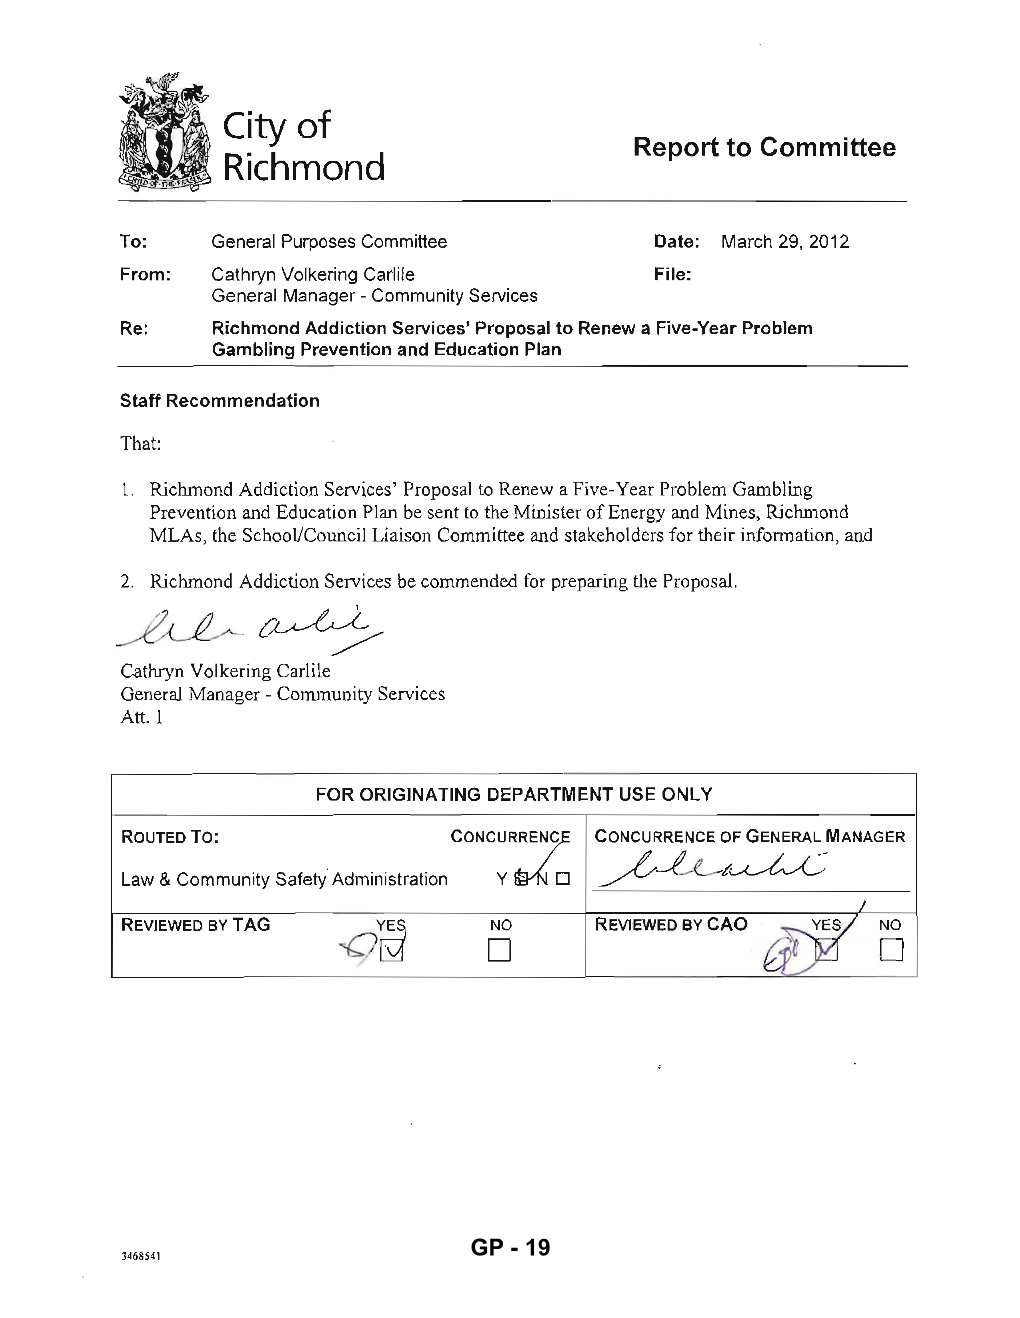 Richmond Addiction Services' Proposal to Renew a Five-Year Problem Gambling Prevention and Education Plan